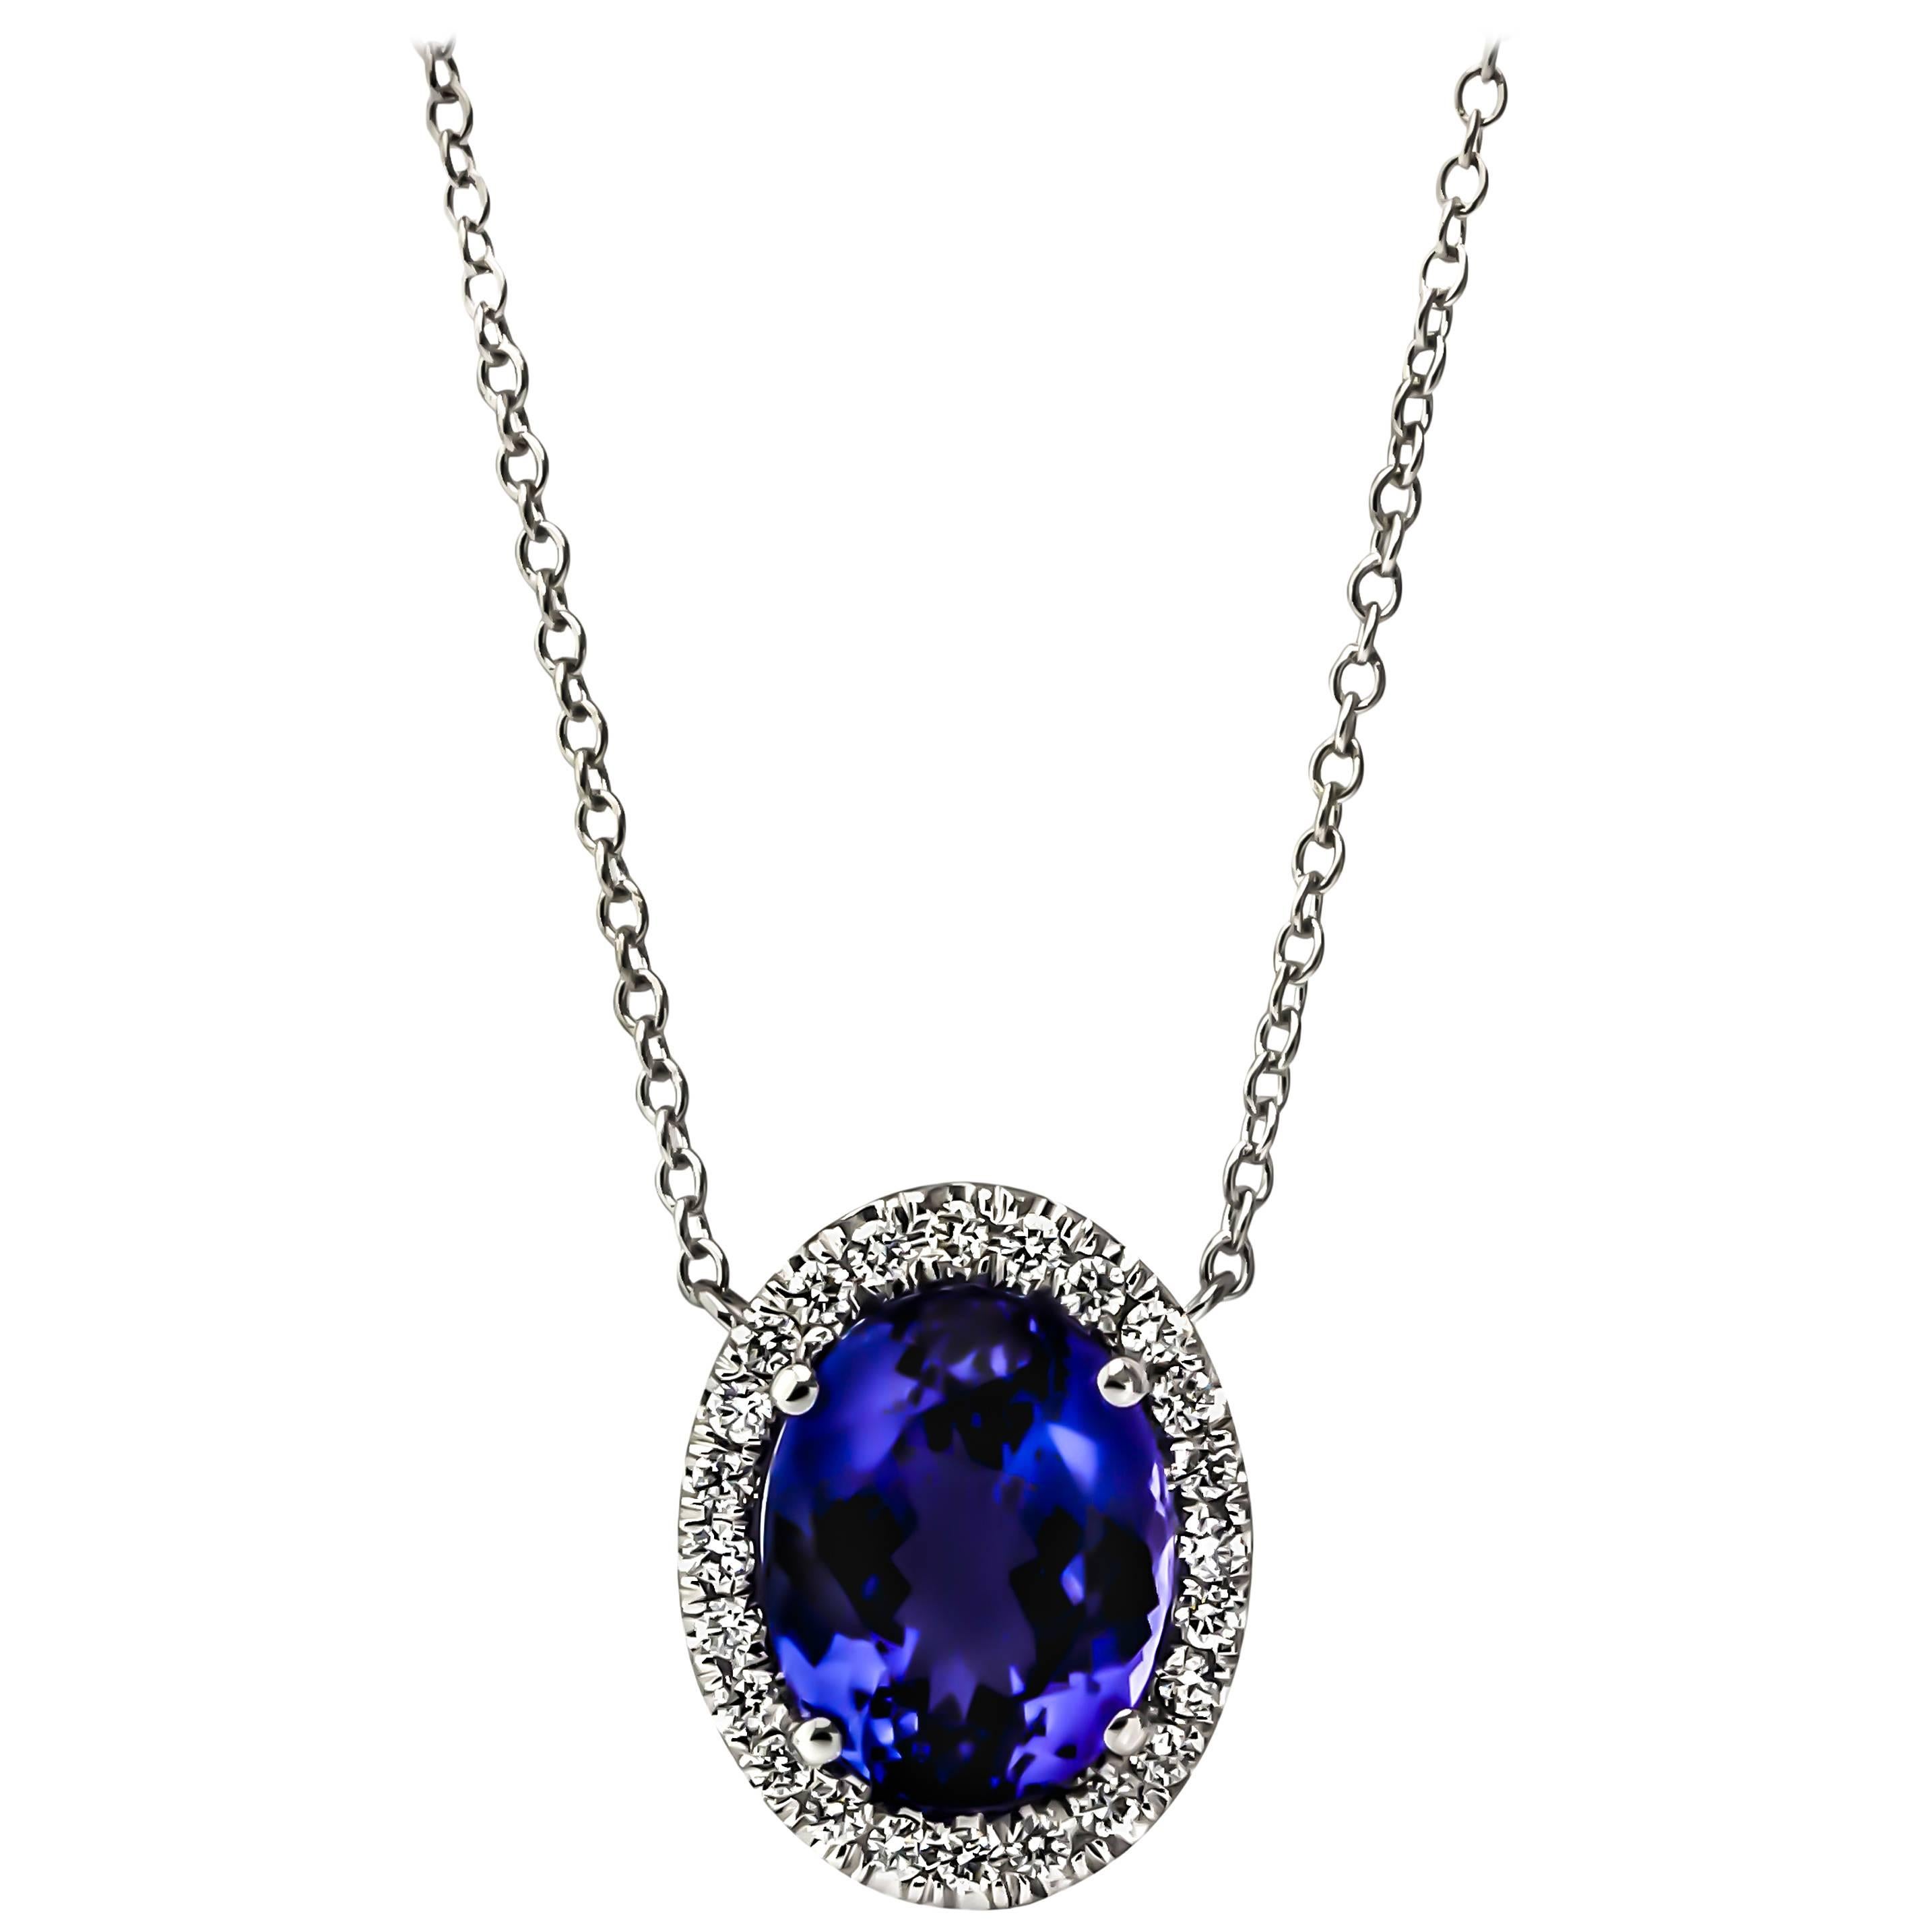 One of a Kind 3.46 Carat Tanzanite Diamond Gold Necklace For Sale